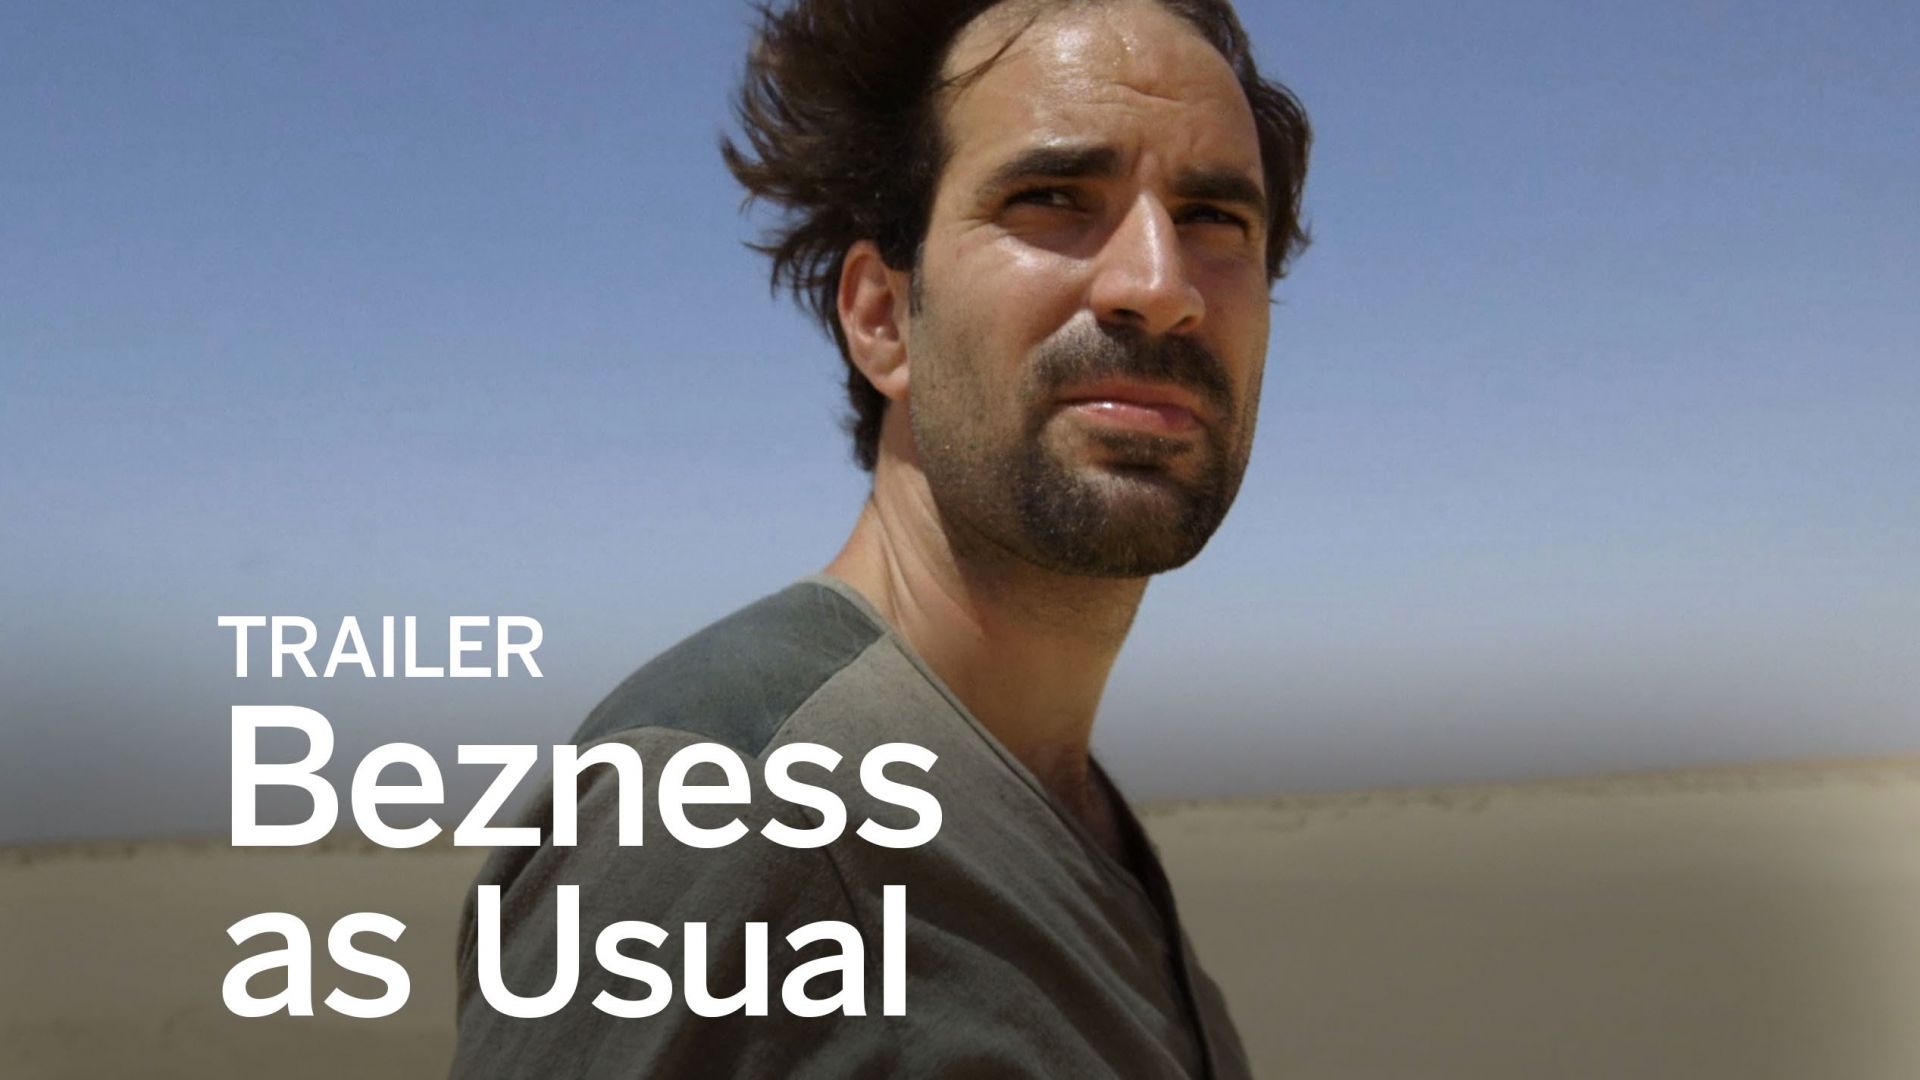 Documentary 'Bezness As Usual' Trailer